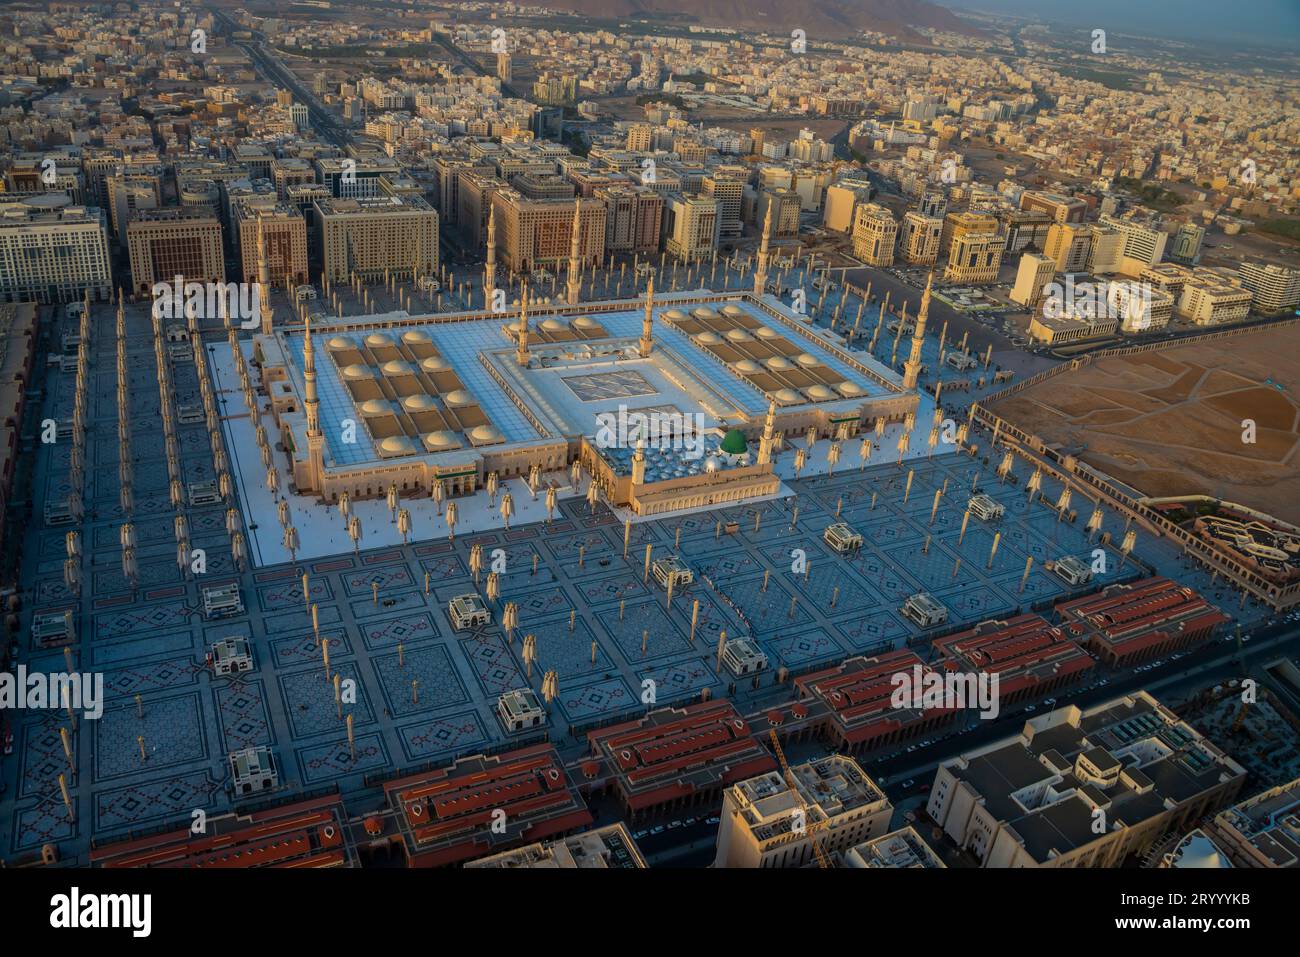 A breathtaking glimpse from the heavens above: the Holy Prophet's Mosque (Masjid Nabawi) in Medina, Saudi Arabia. Stock Photo